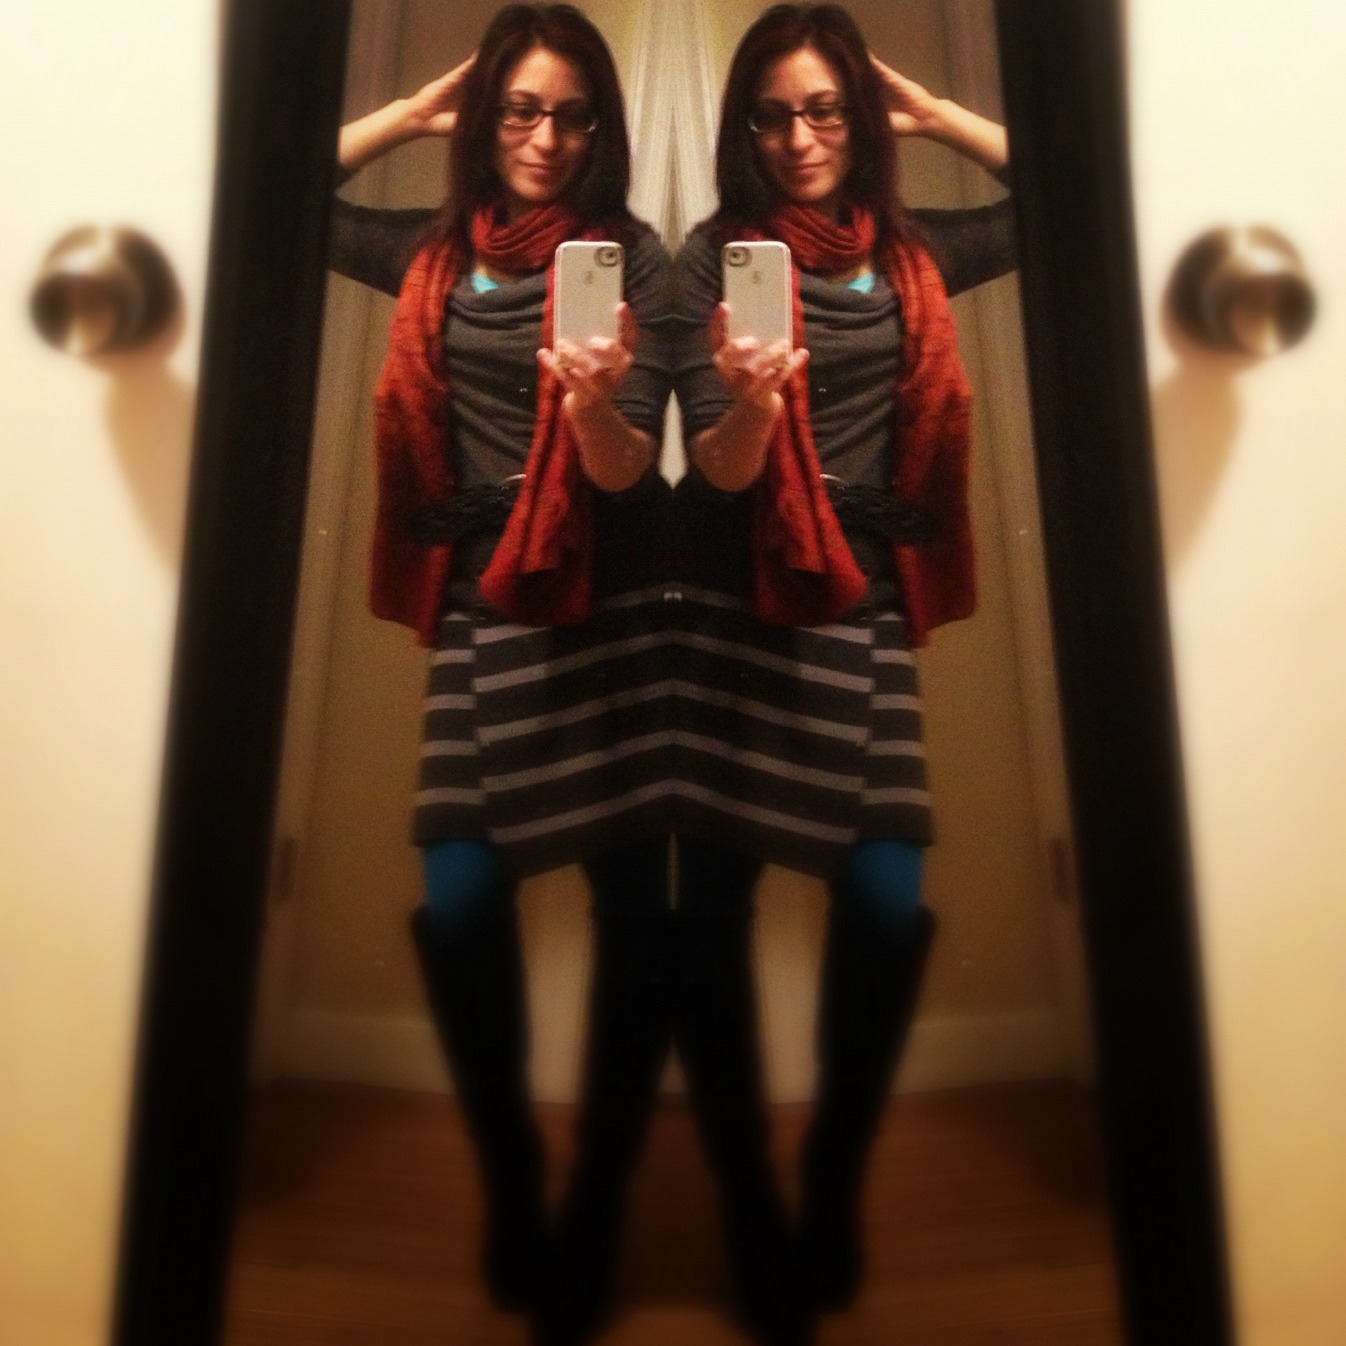 There's two of me